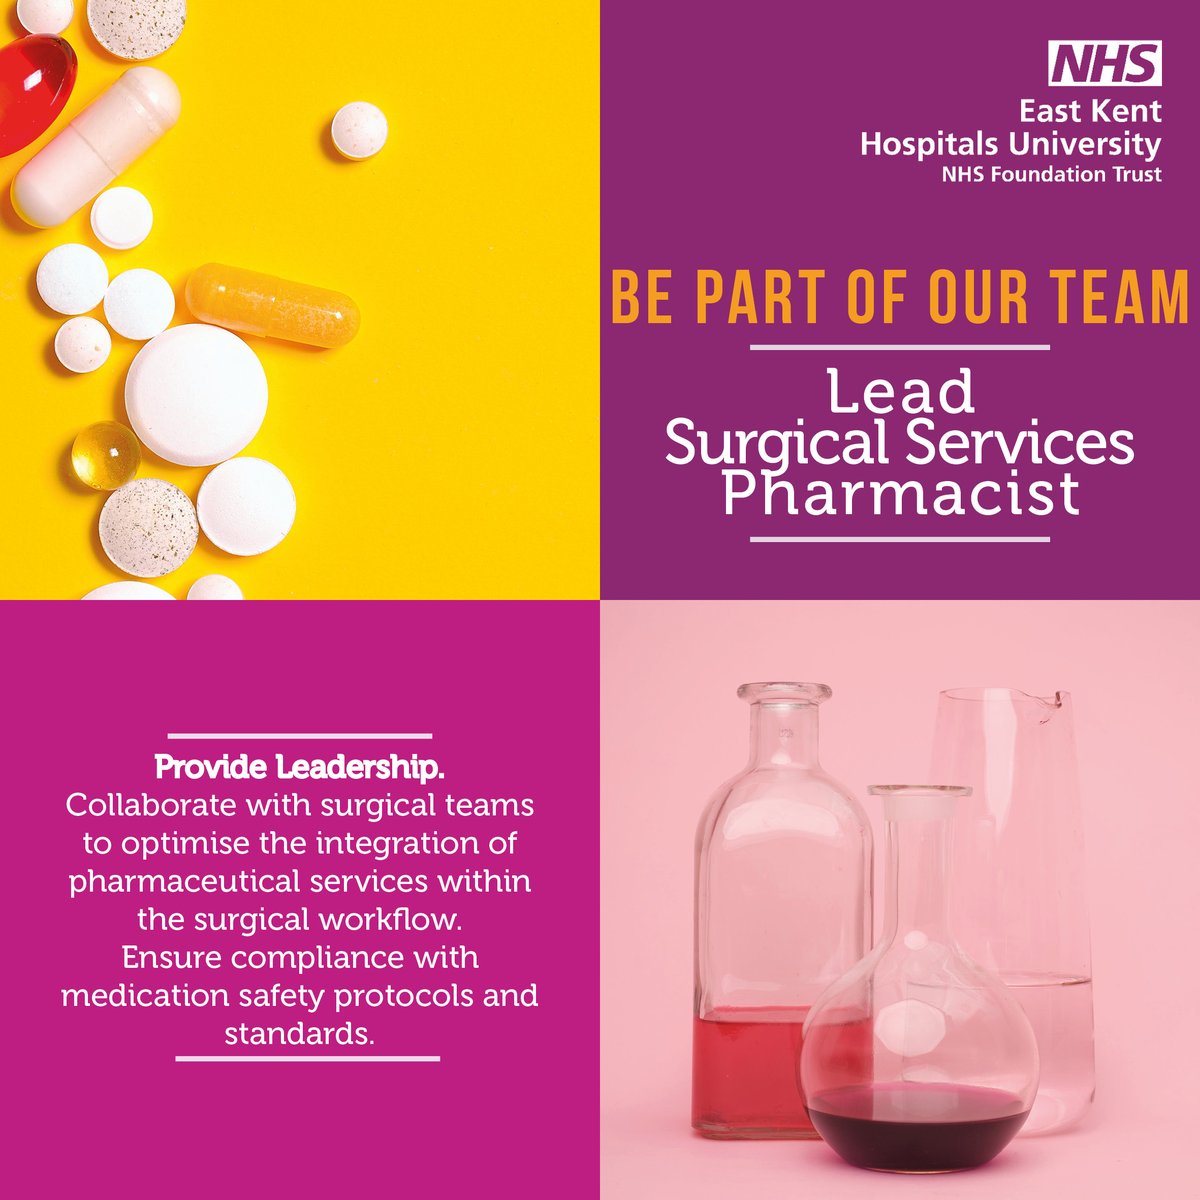 🌟 We're searching for a Lead Surgical Services Pharmacist to shape the future of pharmaceutical care in our dynamic healthcare team.

orlo.uk/LSSP_sdUjm

#PharmacyLeadership #PharmacyJobs #EKHUFT #NHSJobs #NHScareers #WeAreTheNhs #HealthcareCareers #KentJobs